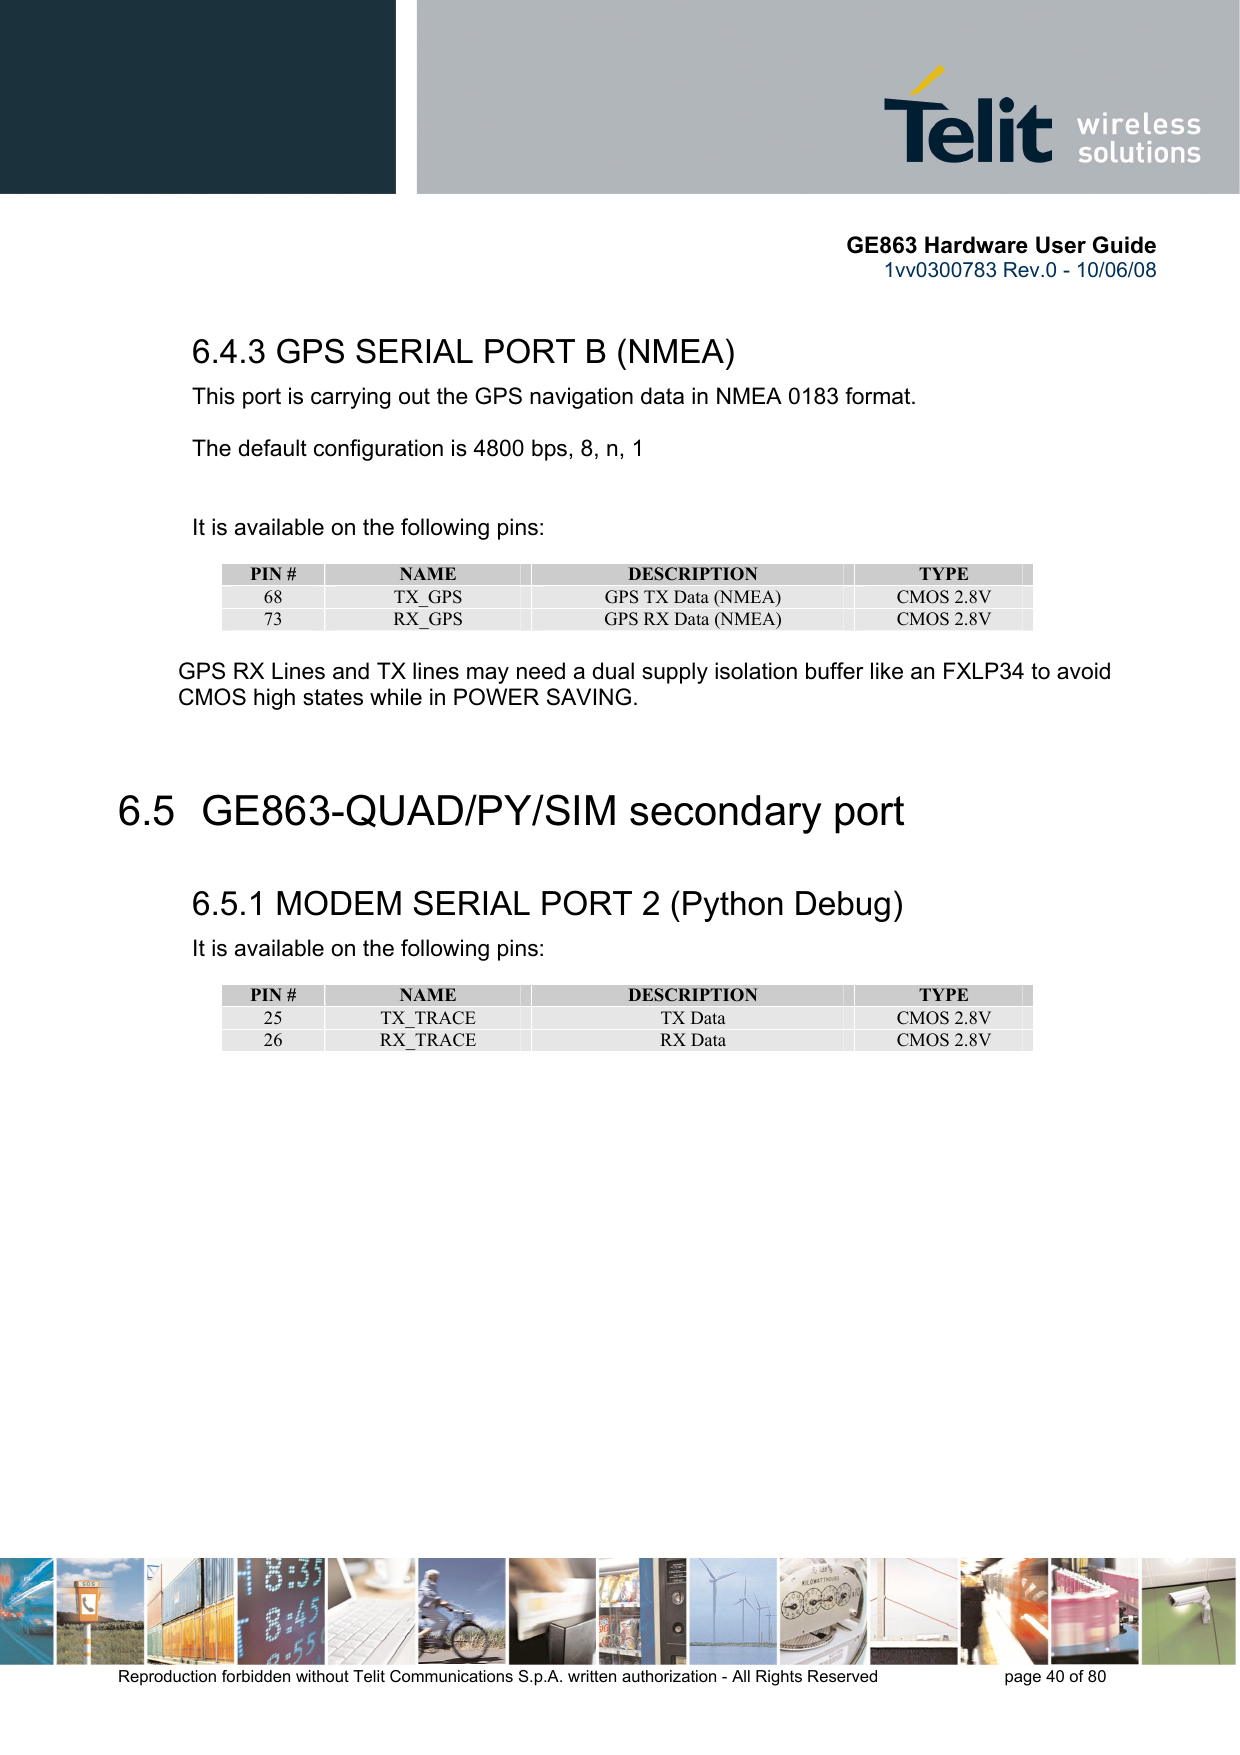       GE863 Hardware User Guide 1vv0300783 Rev.0 - 10/06/08 Reproduction forbidden without Telit Communications S.p.A. written authorization - All Rights Reserved    page 40 of 80  6.4.3 GPS SERIAL PORT B (NMEA) This port is carrying out the GPS navigation data in NMEA 0183 format.  The default configuration is 4800 bps, 8, n, 1   It is available on the following pins:  PIN #  NAME  DESCRIPTION  TYPE 68  TX_GPS  GPS TX Data (NMEA)  CMOS 2.8V 73  RX_GPS  GPS RX Data (NMEA)  CMOS 2.8V  GPS RX Lines and TX lines may need a dual supply isolation buffer like an FXLP34 to avoid CMOS high states while in POWER SAVING.  6.5  GE863-QUAD/PY/SIM secondary port 6.5.1 MODEM SERIAL PORT 2 (Python Debug) It is available on the following pins:  PIN #  NAME  DESCRIPTION  TYPE 25  TX_TRACE  TX Data   CMOS 2.8V 26  RX_TRACE  RX Data   CMOS 2.8V     